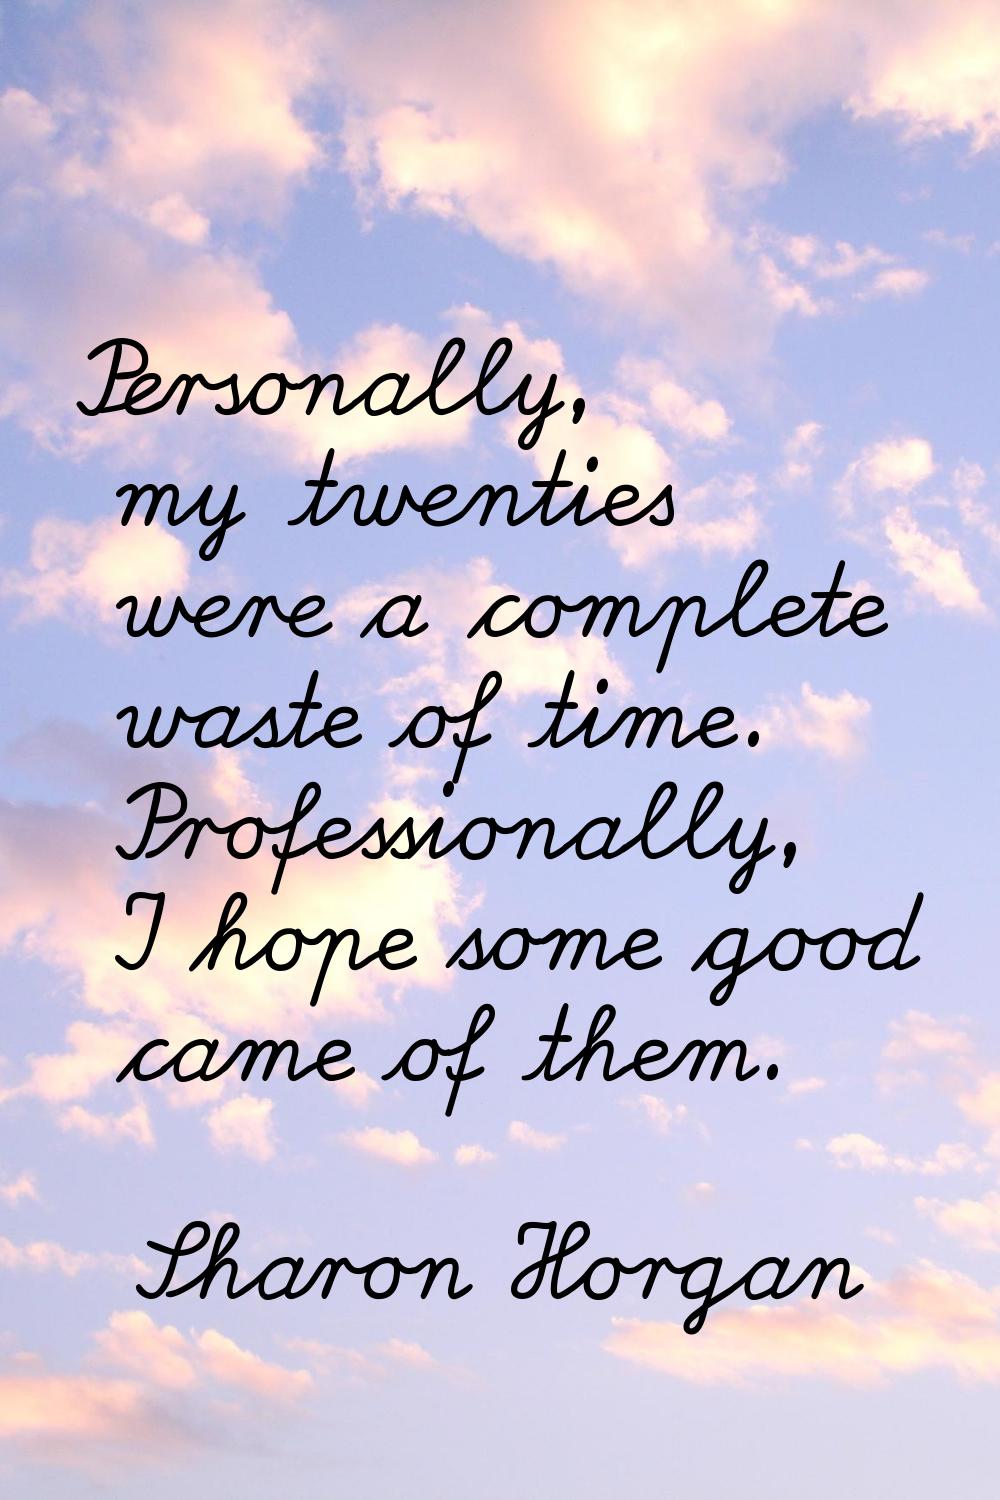 Personally, my twenties were a complete waste of time. Professionally, I hope some good came of the